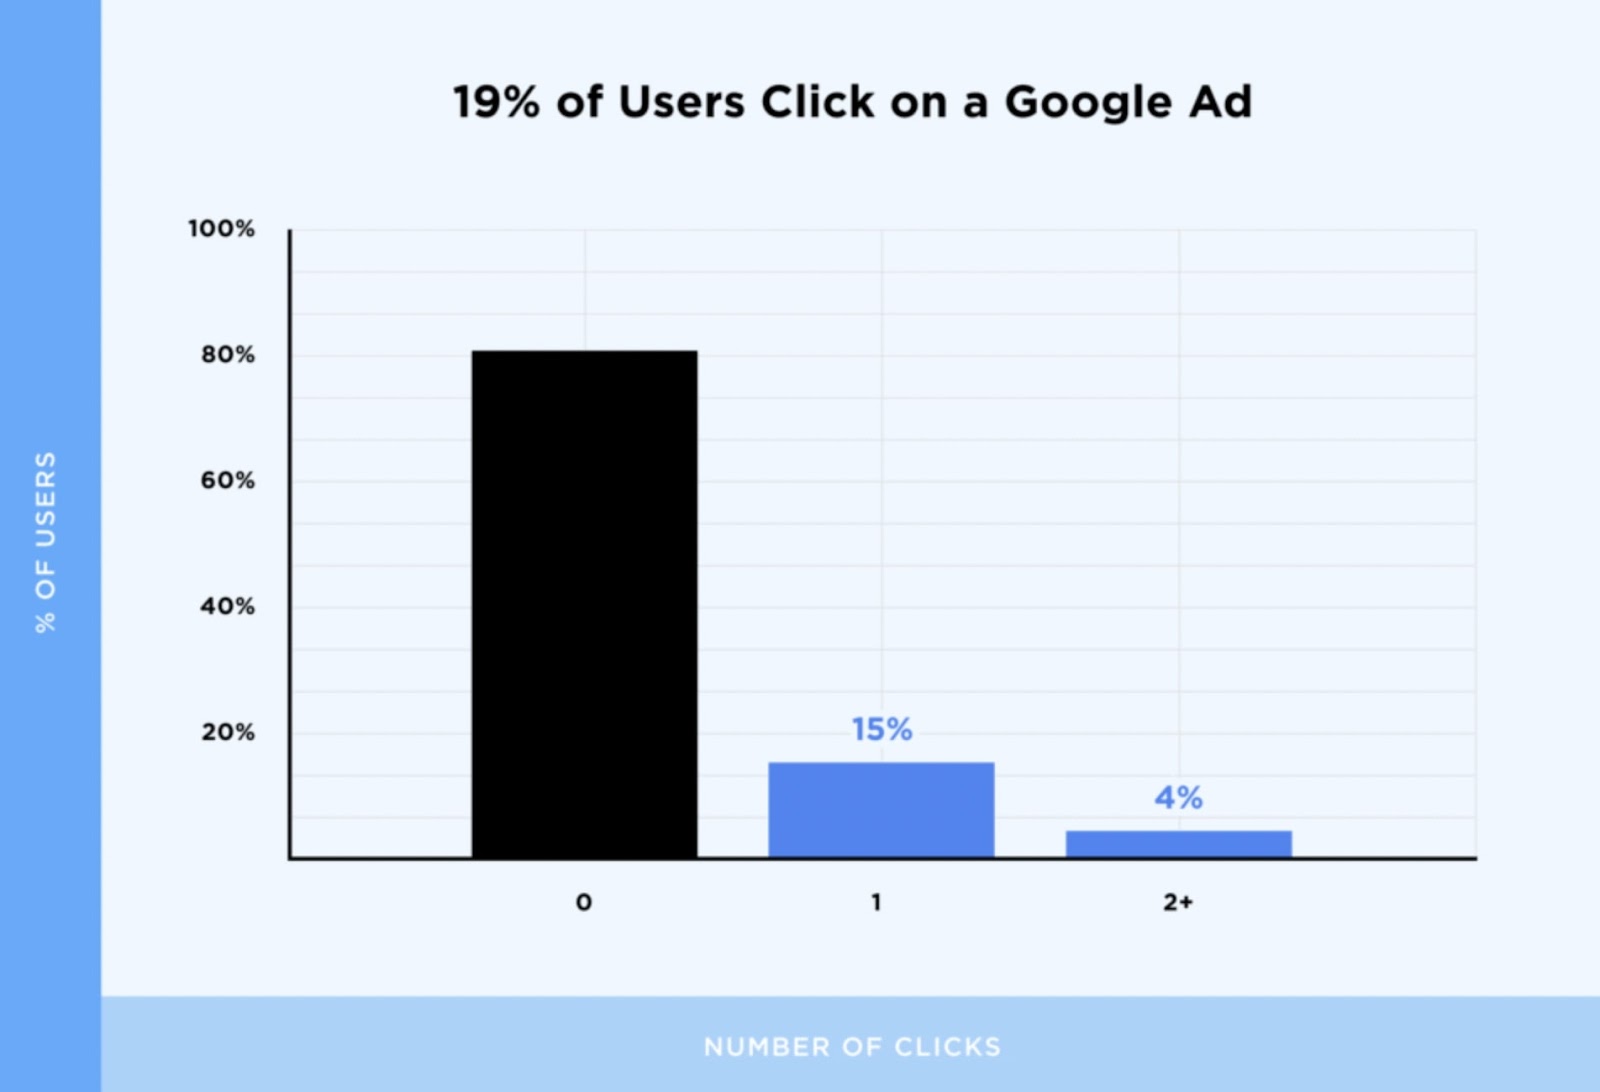 Backlinko's graph showing that 19% of searchers click on a Google ad when searching something